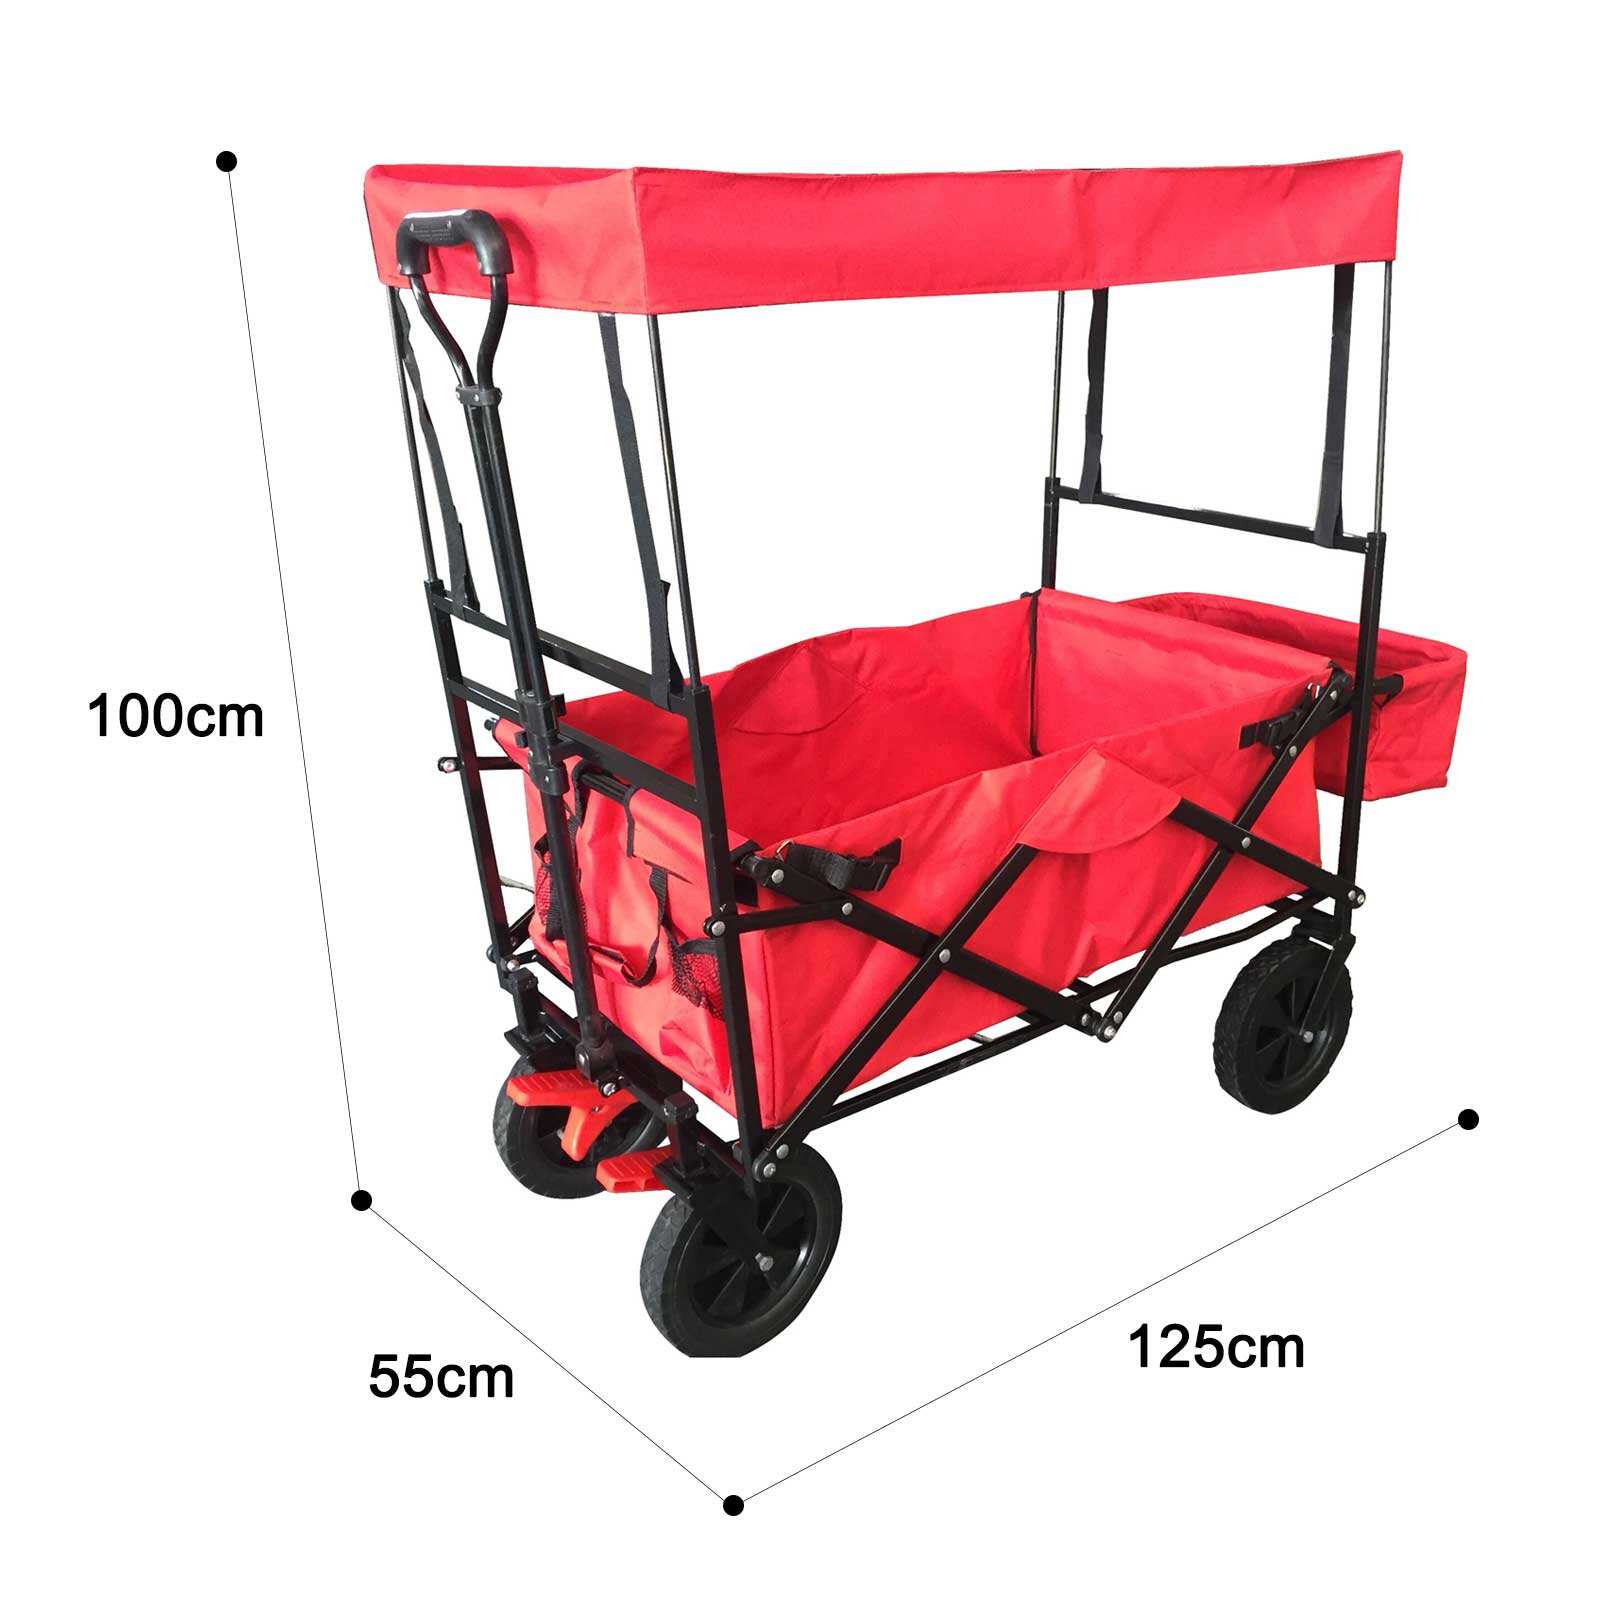 GT1804 Folding wagon, Foldable Utility Wagon Cart, for Camping Outdoor Garden manufacture